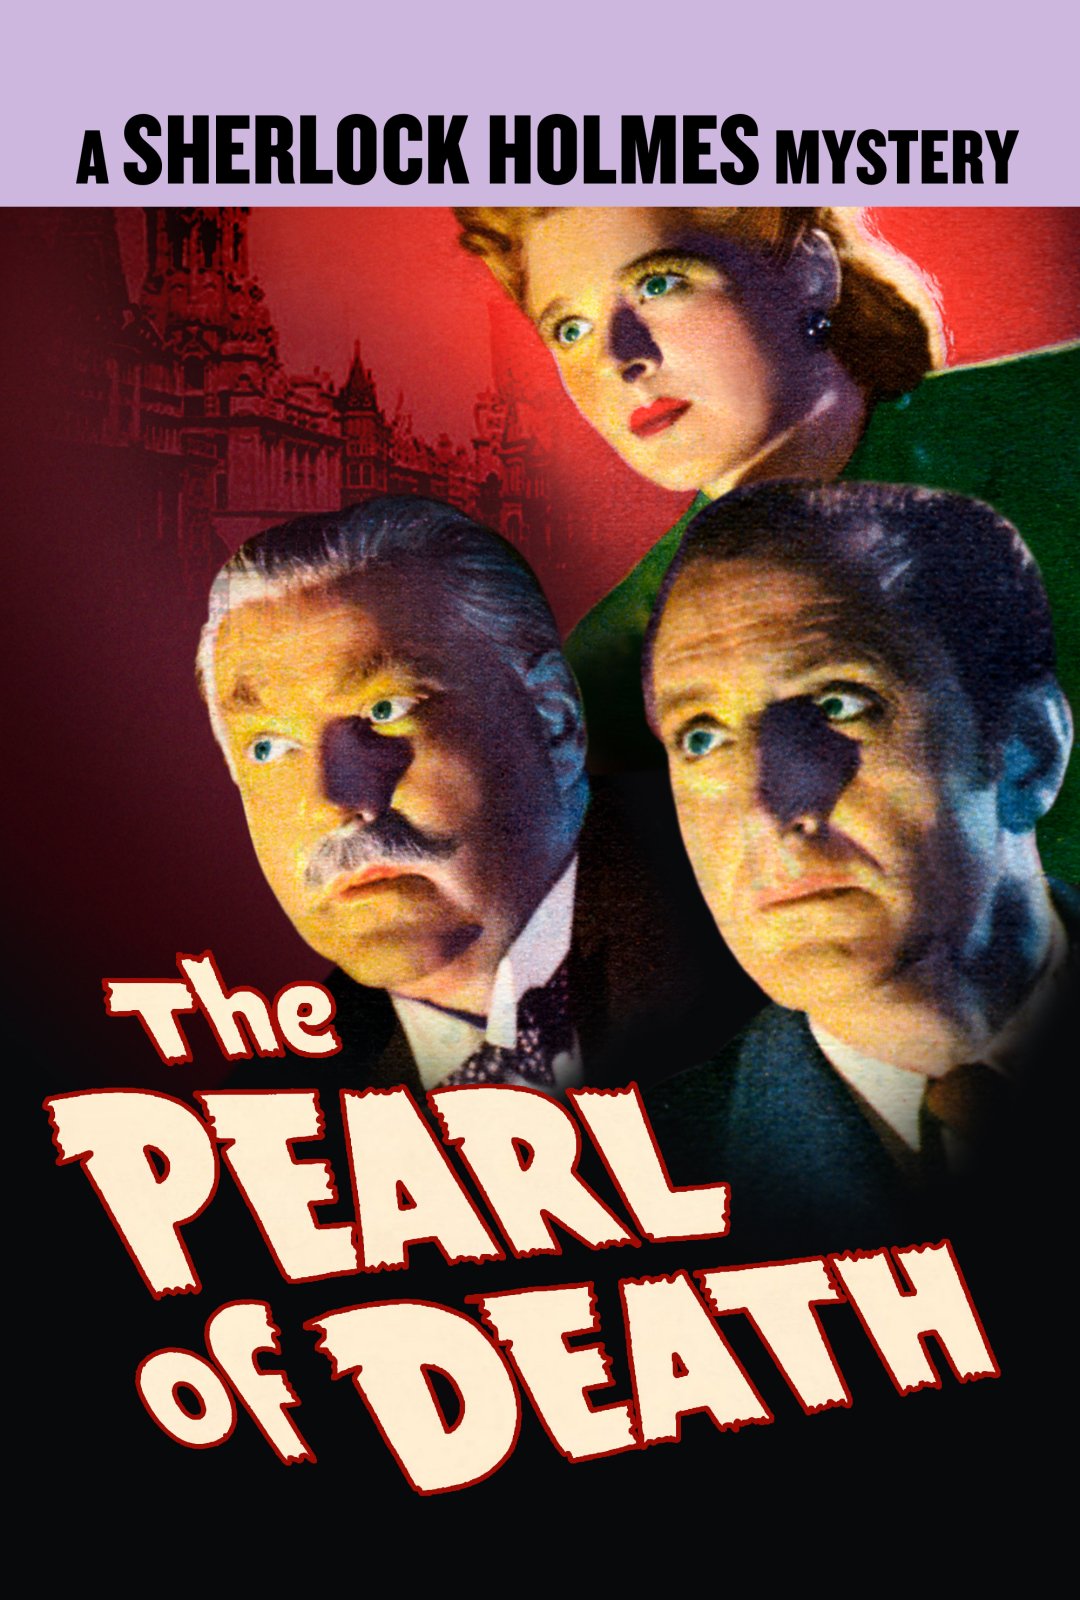 Sherlock Holmes And The Pearl Of